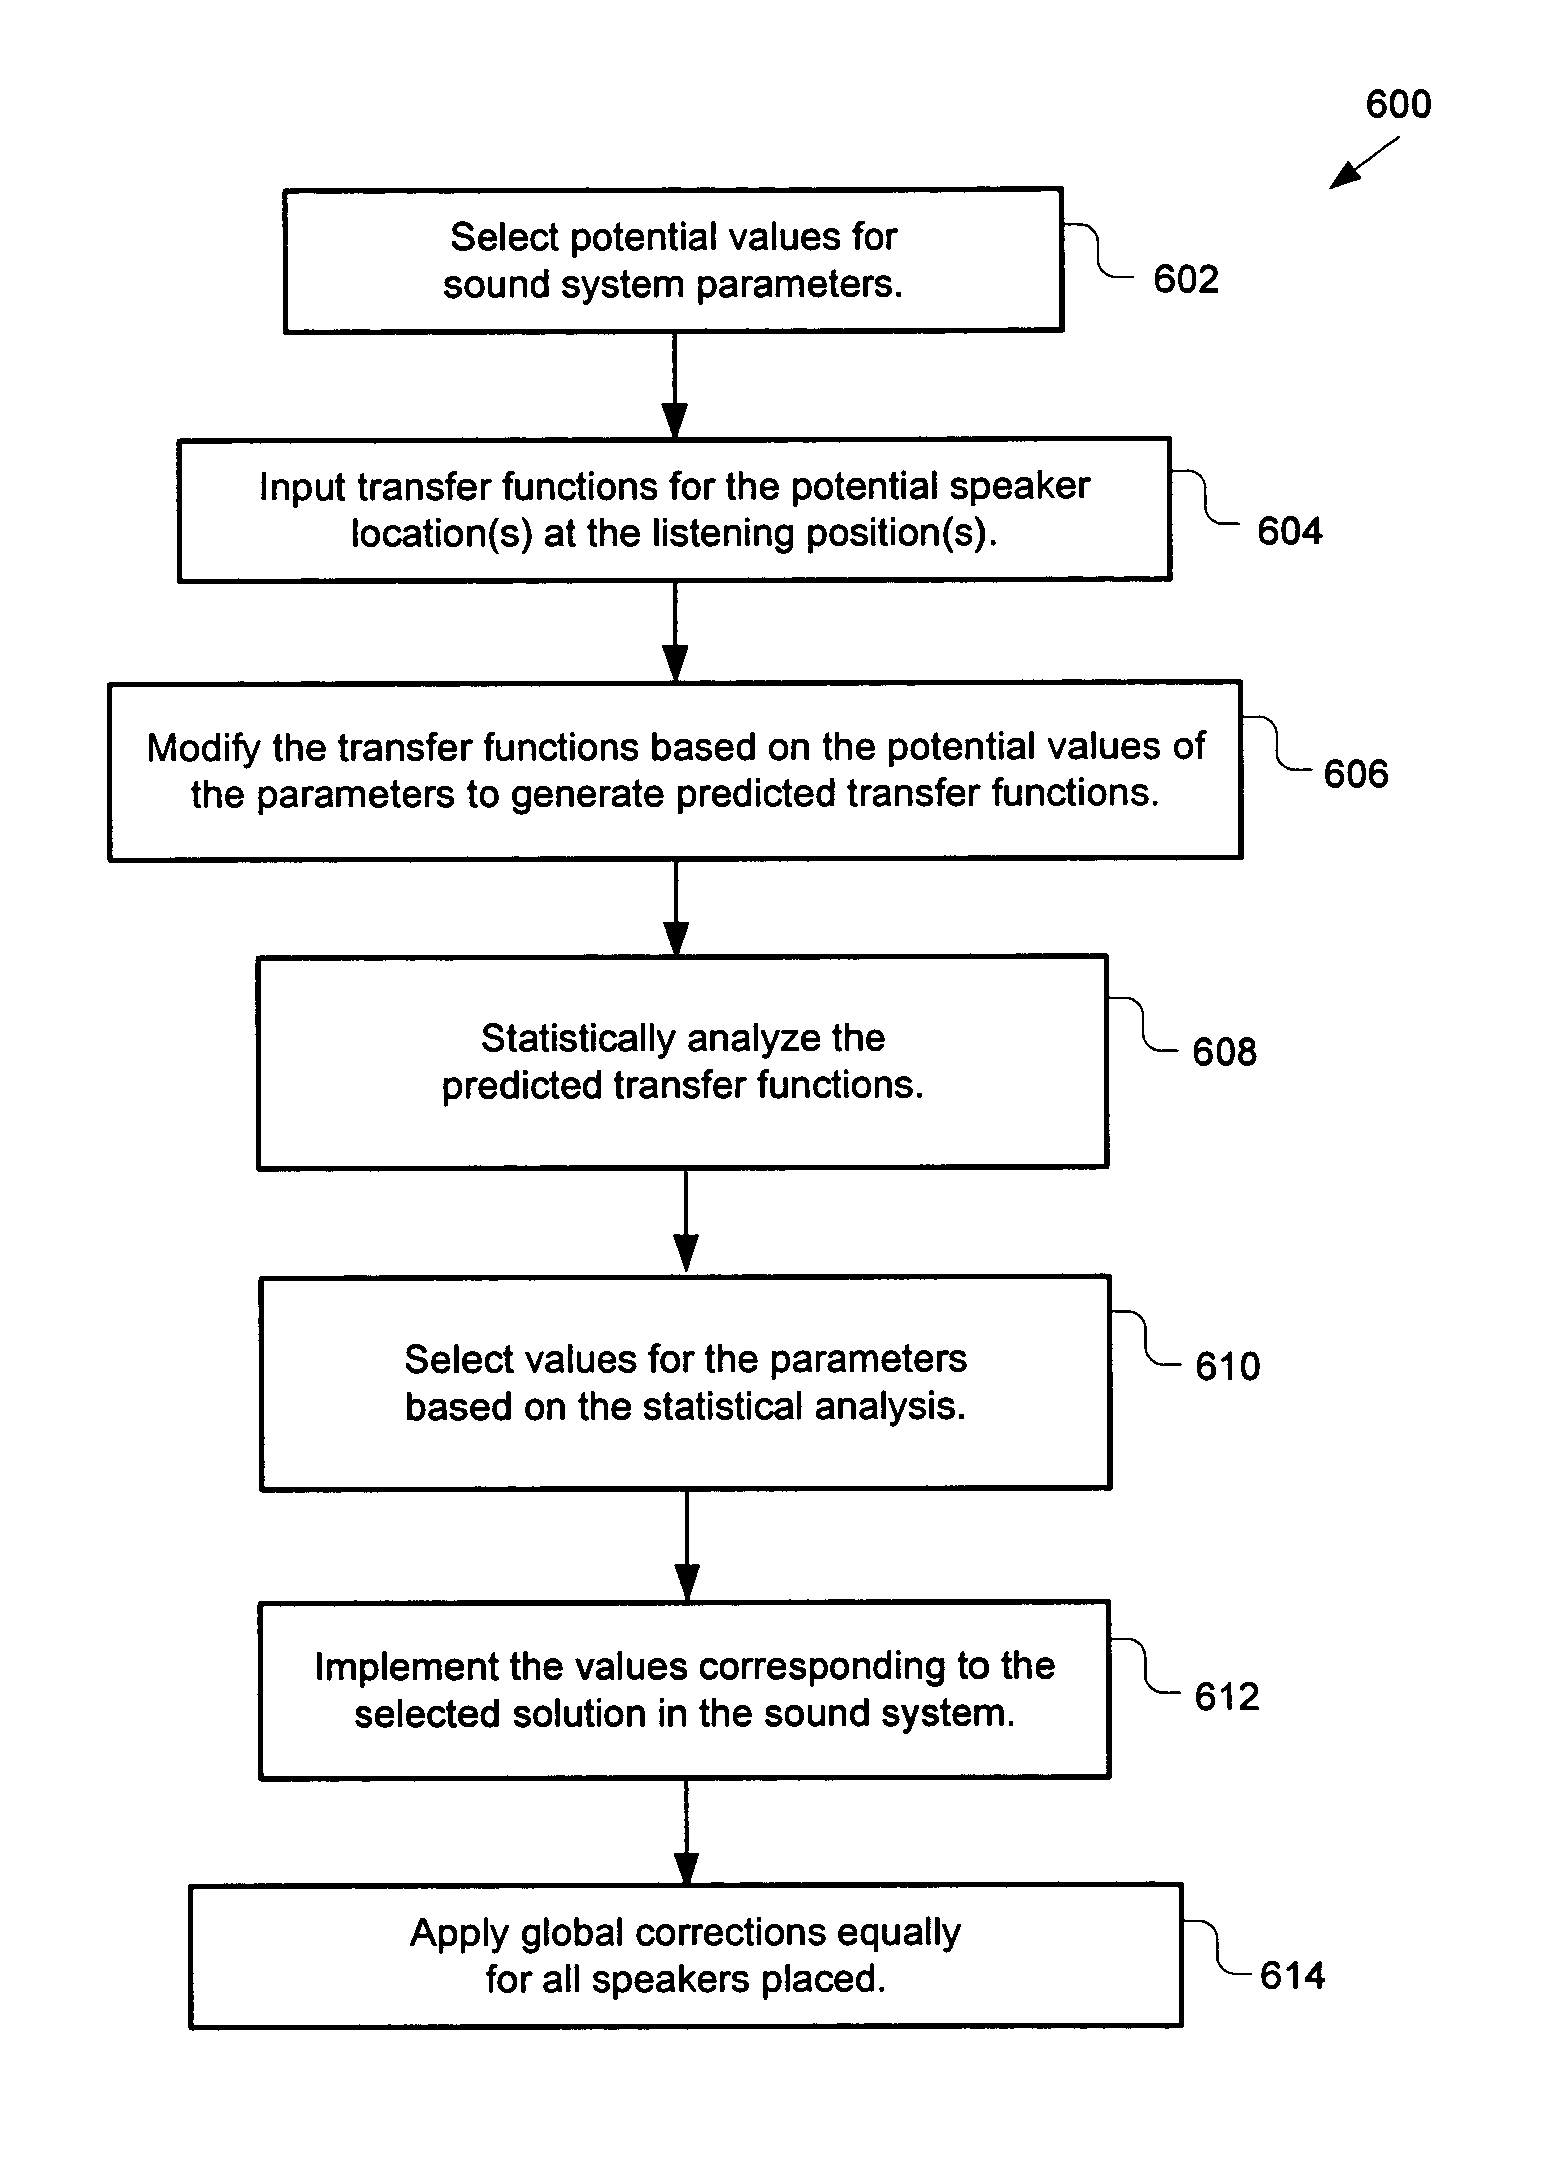 System for selecting speaker locations in an audio system